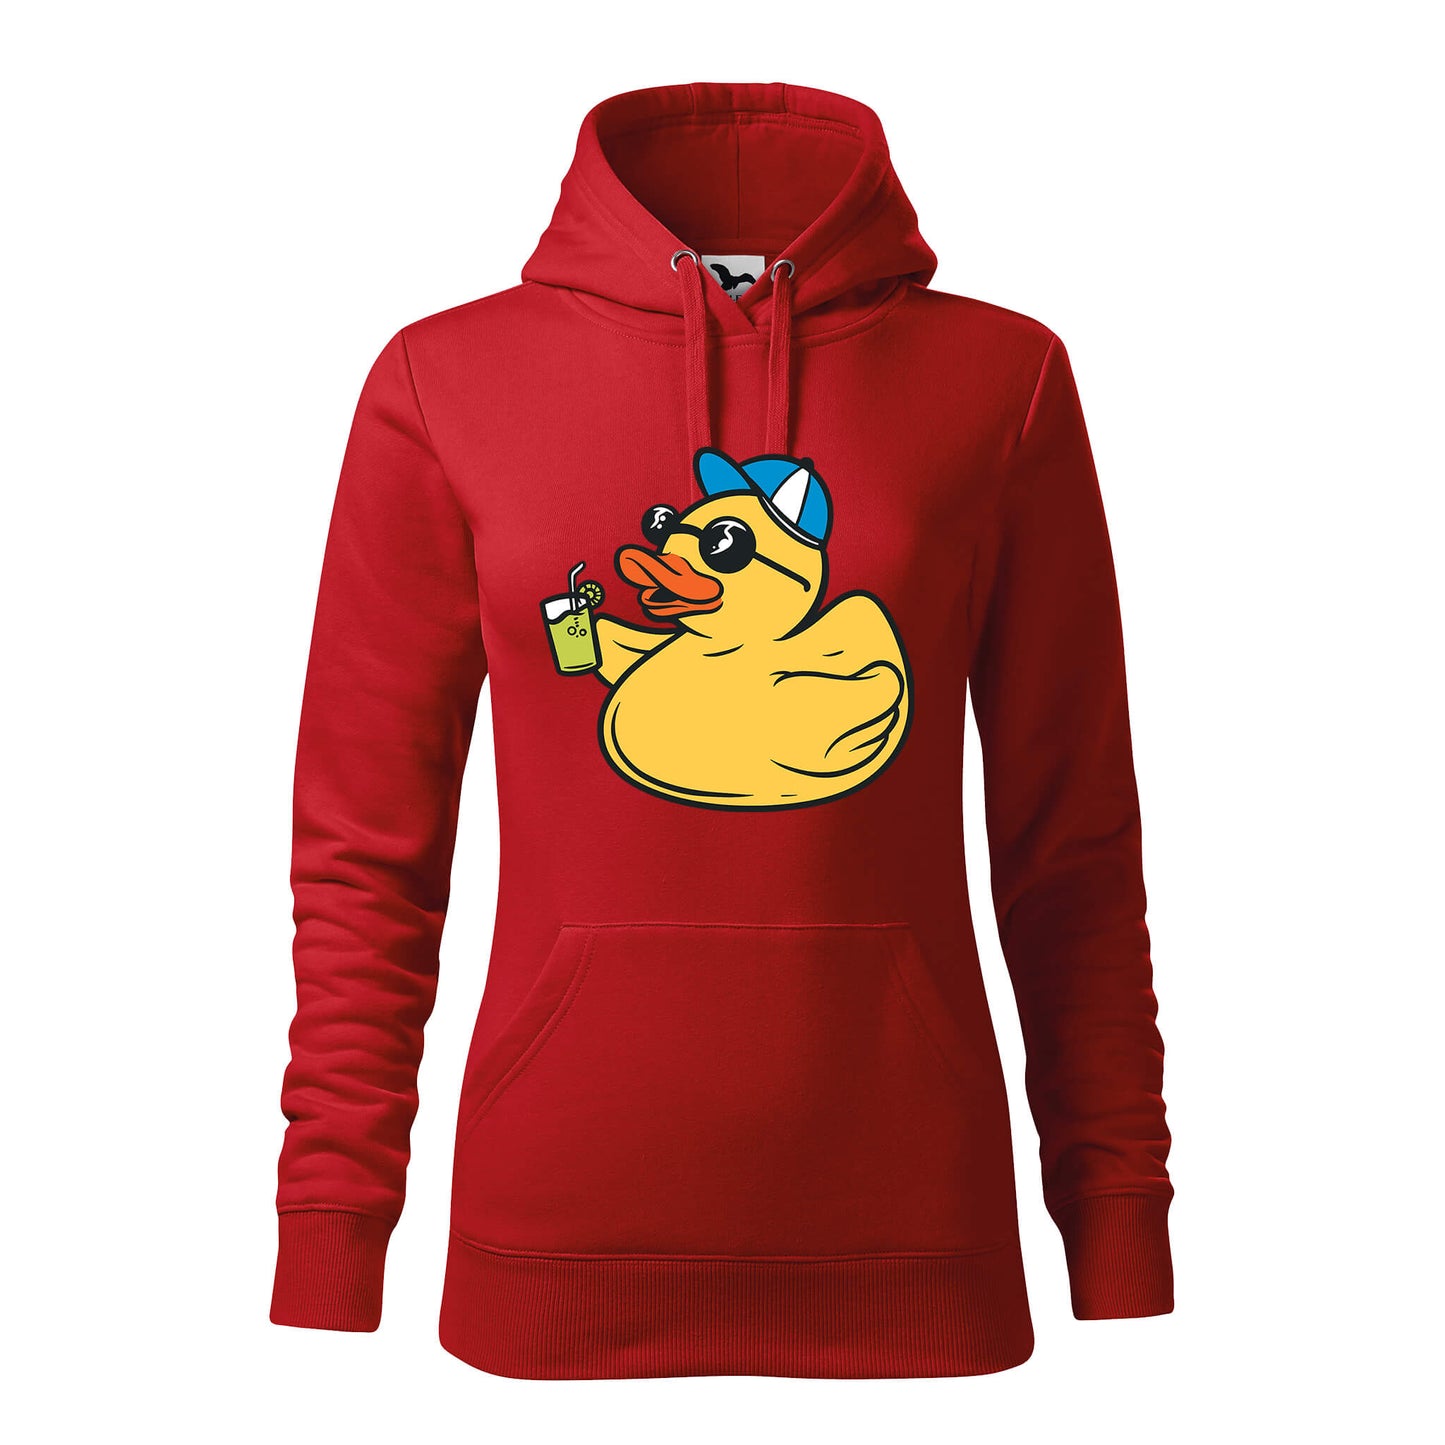 Party rubber duck hoodie - rvdesignprint